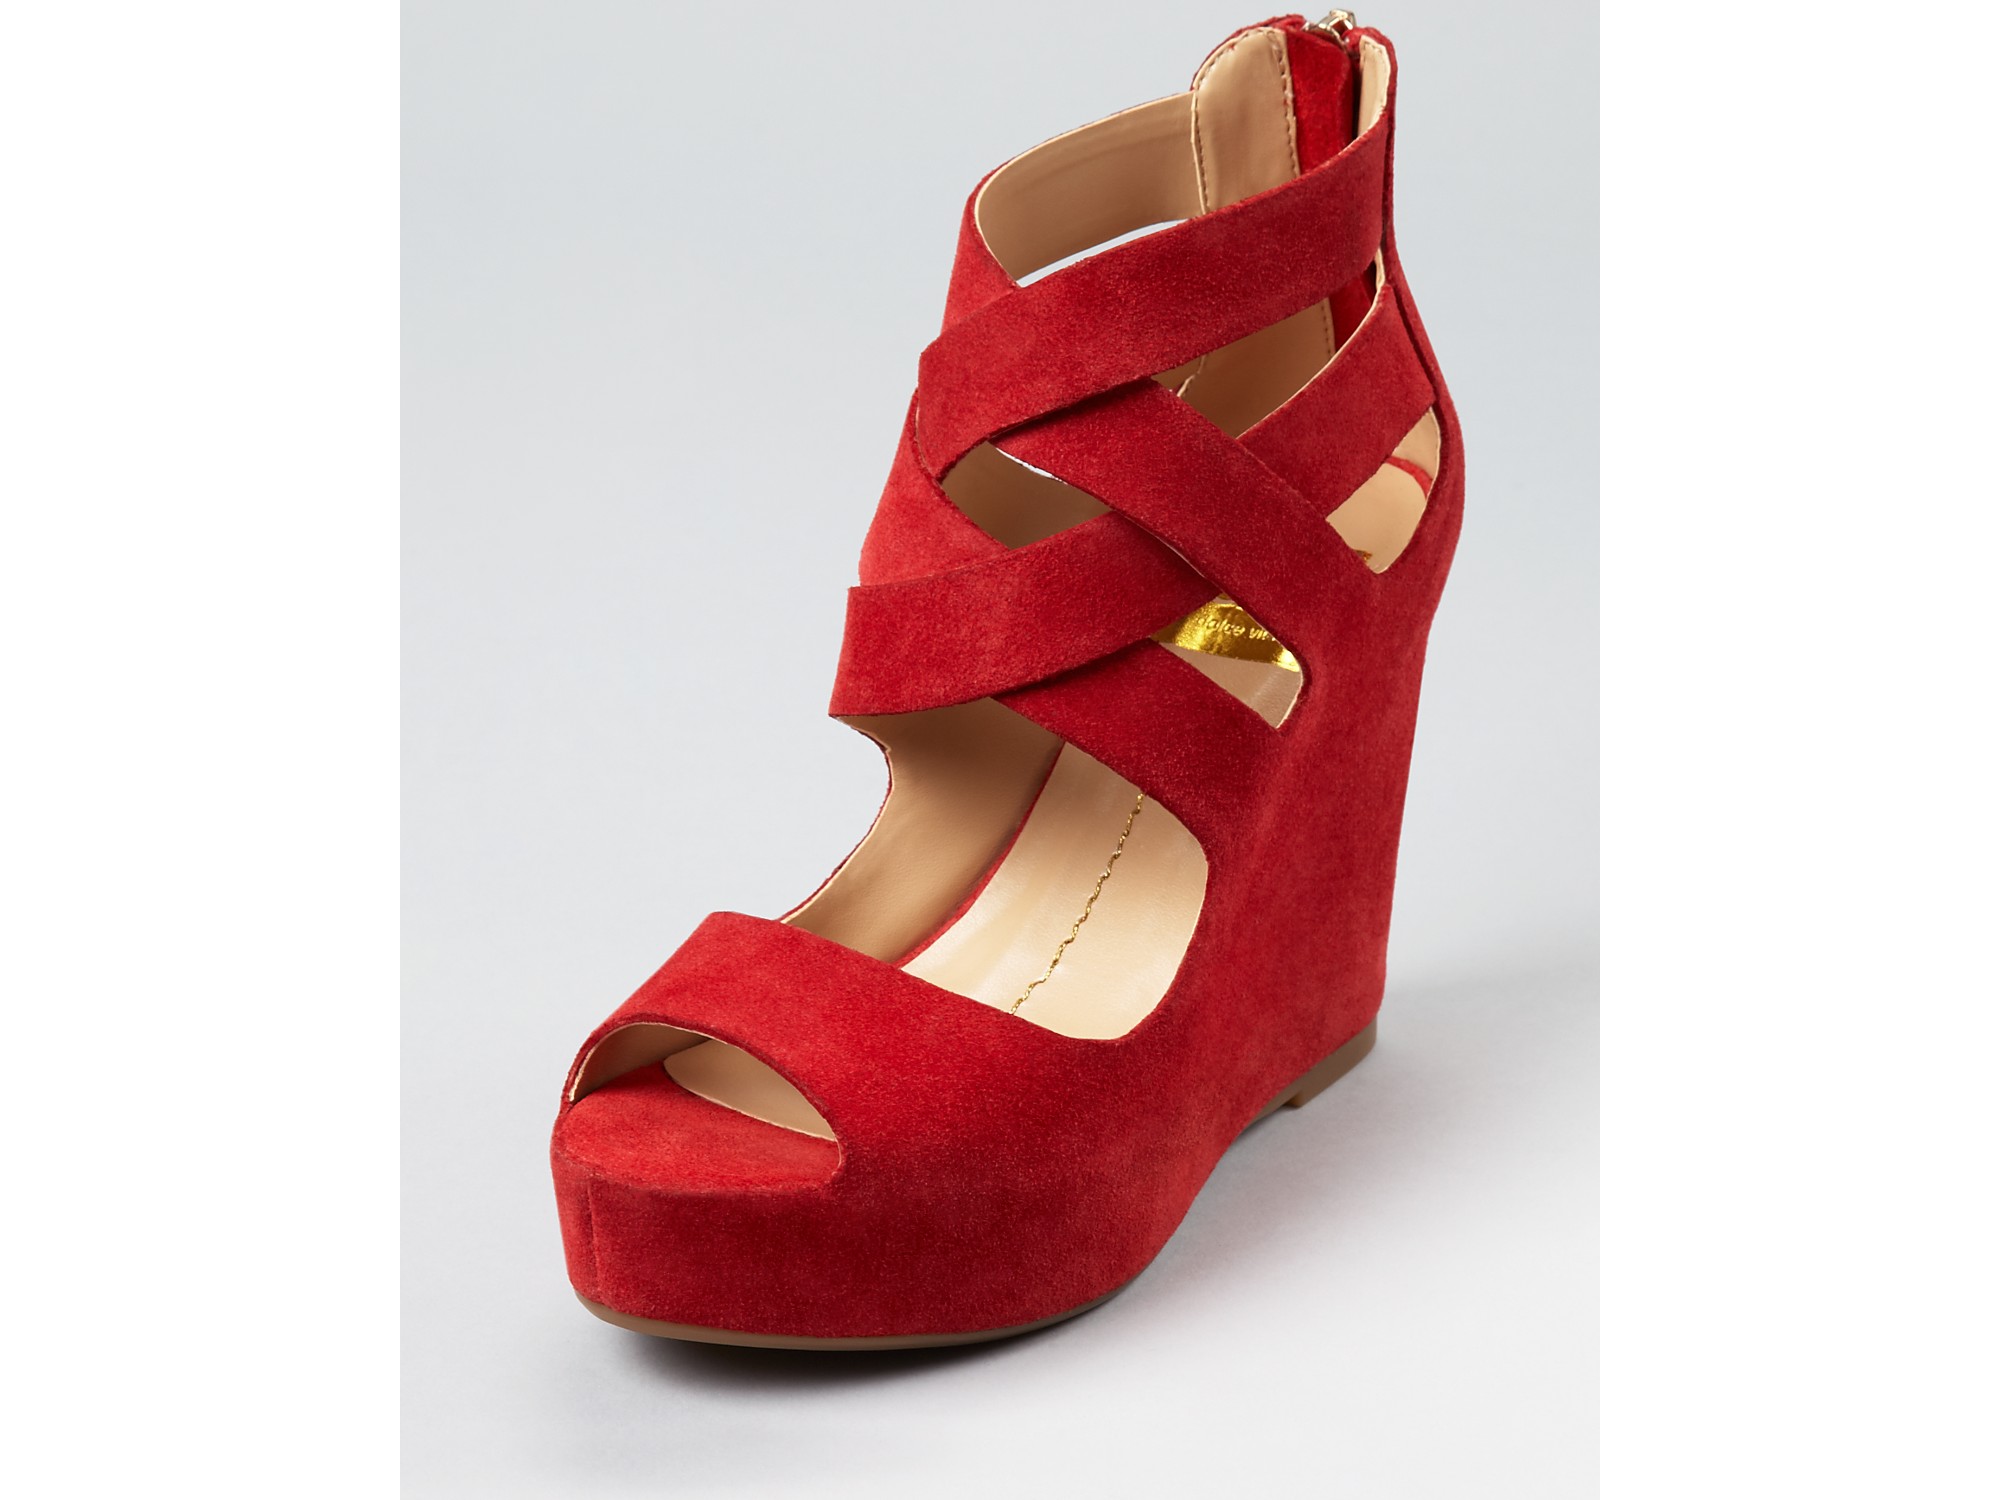 Lyst - Dolce vita Dv Wedges Jude Strappy in Red